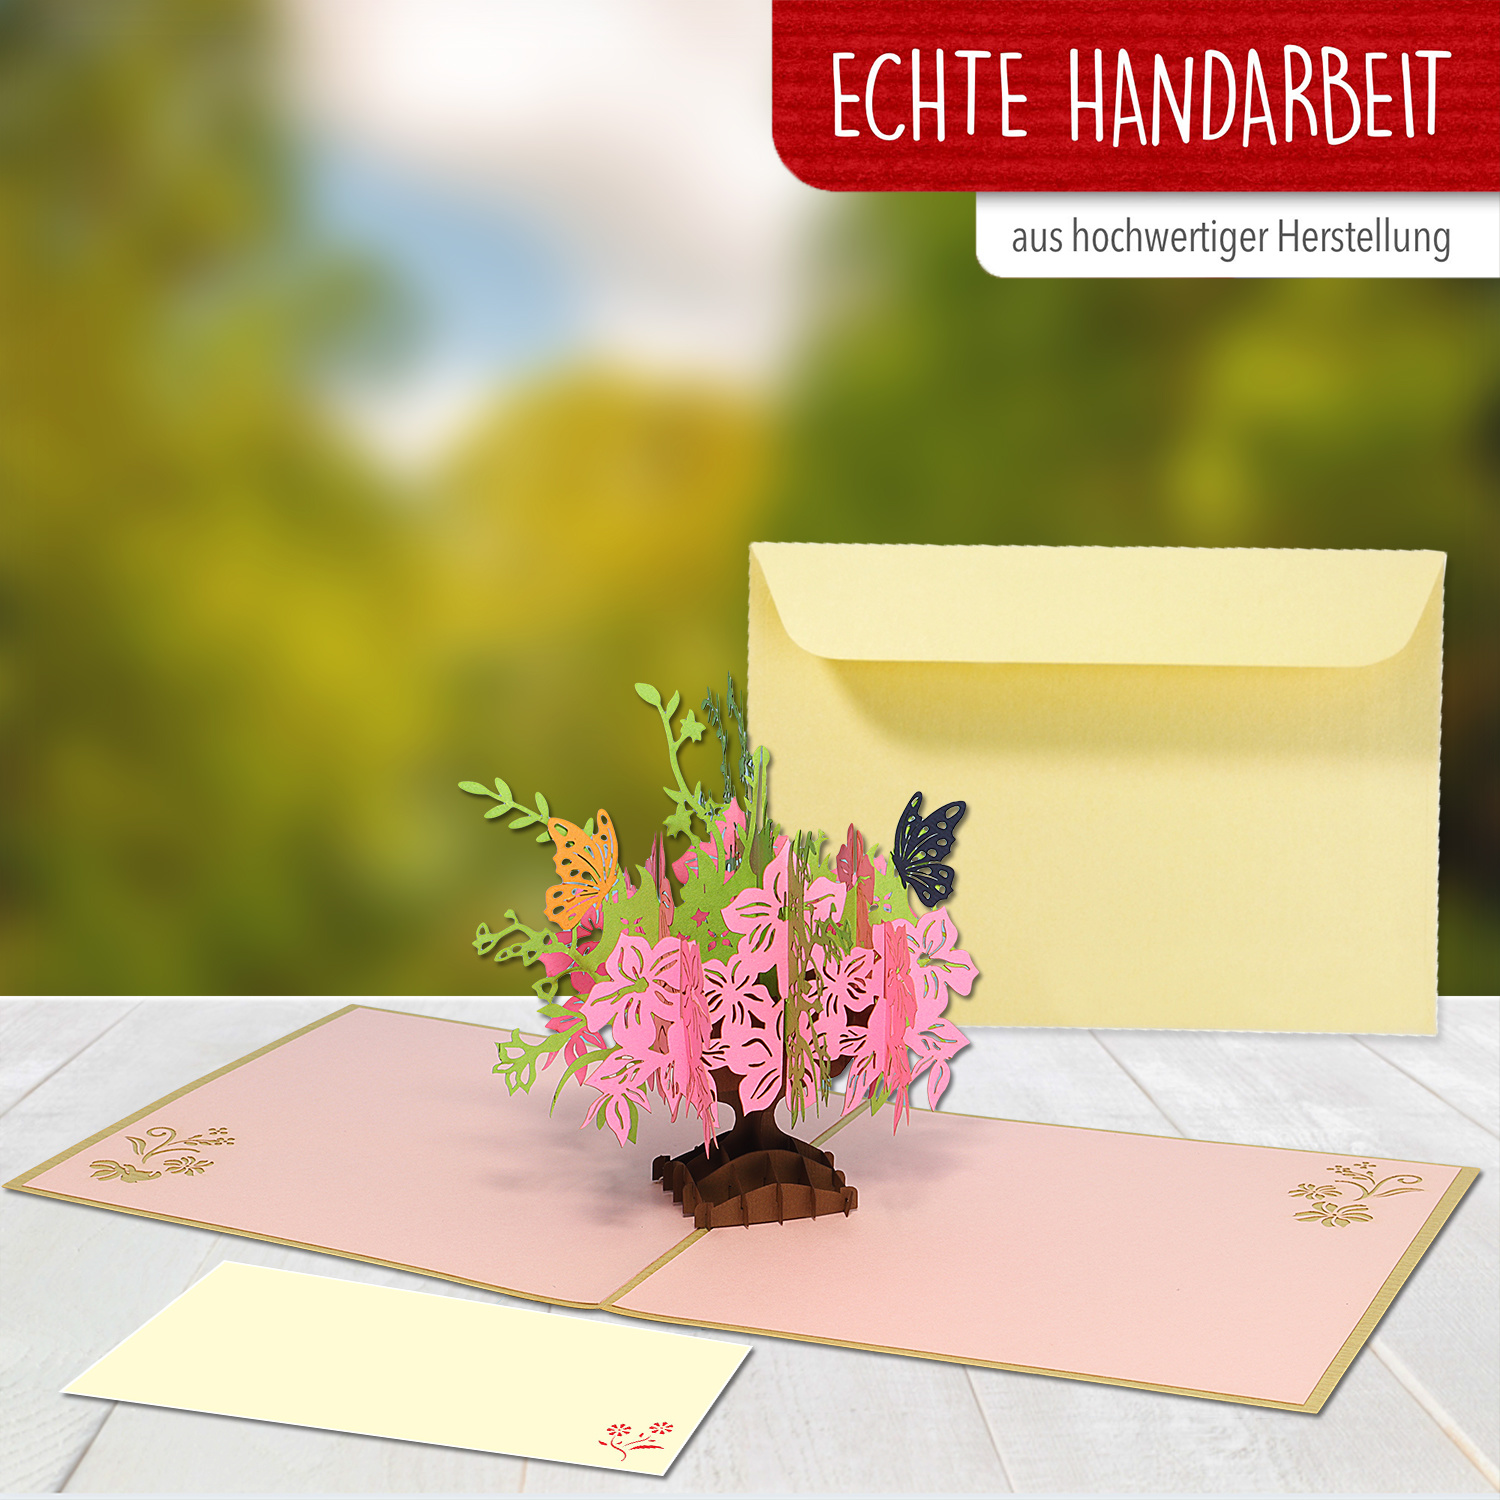 LINPOPUP 3D Pop Up Greeting Card, Best Wishes, Birthday, Mother's Day, Thank You, Good Luck, Flowers, Pink Flowers in a Vase, LIN17652, LINPopUp®, N379